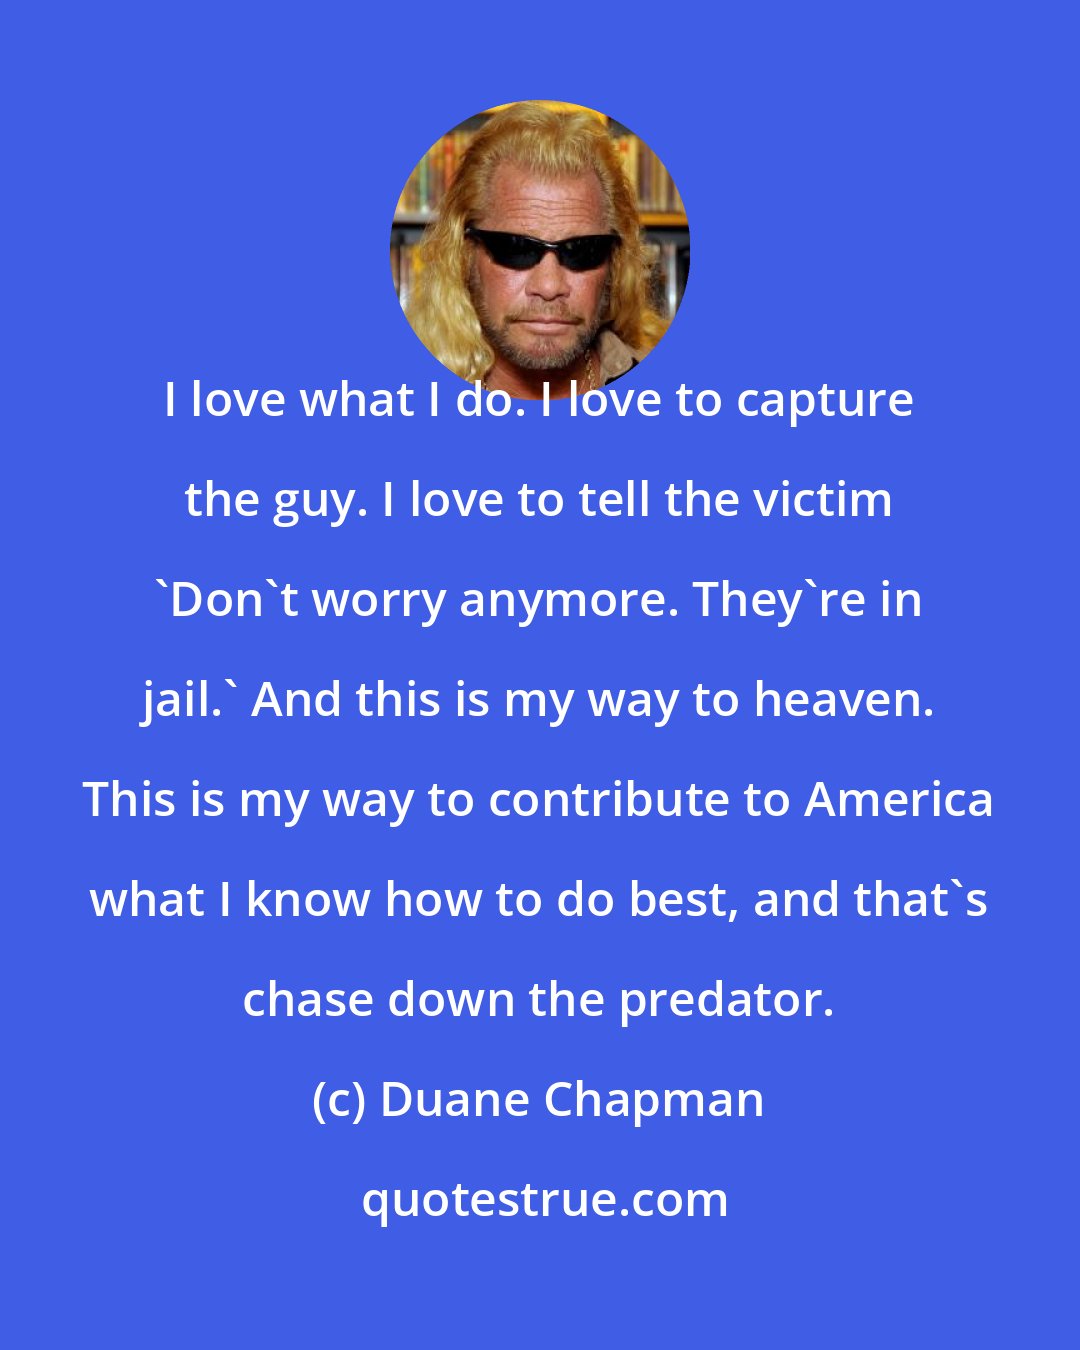 Duane Chapman: I love what I do. I love to capture the guy. I love to tell the victim 'Don't worry anymore. They're in jail.' And this is my way to heaven. This is my way to contribute to America what I know how to do best, and that's chase down the predator.